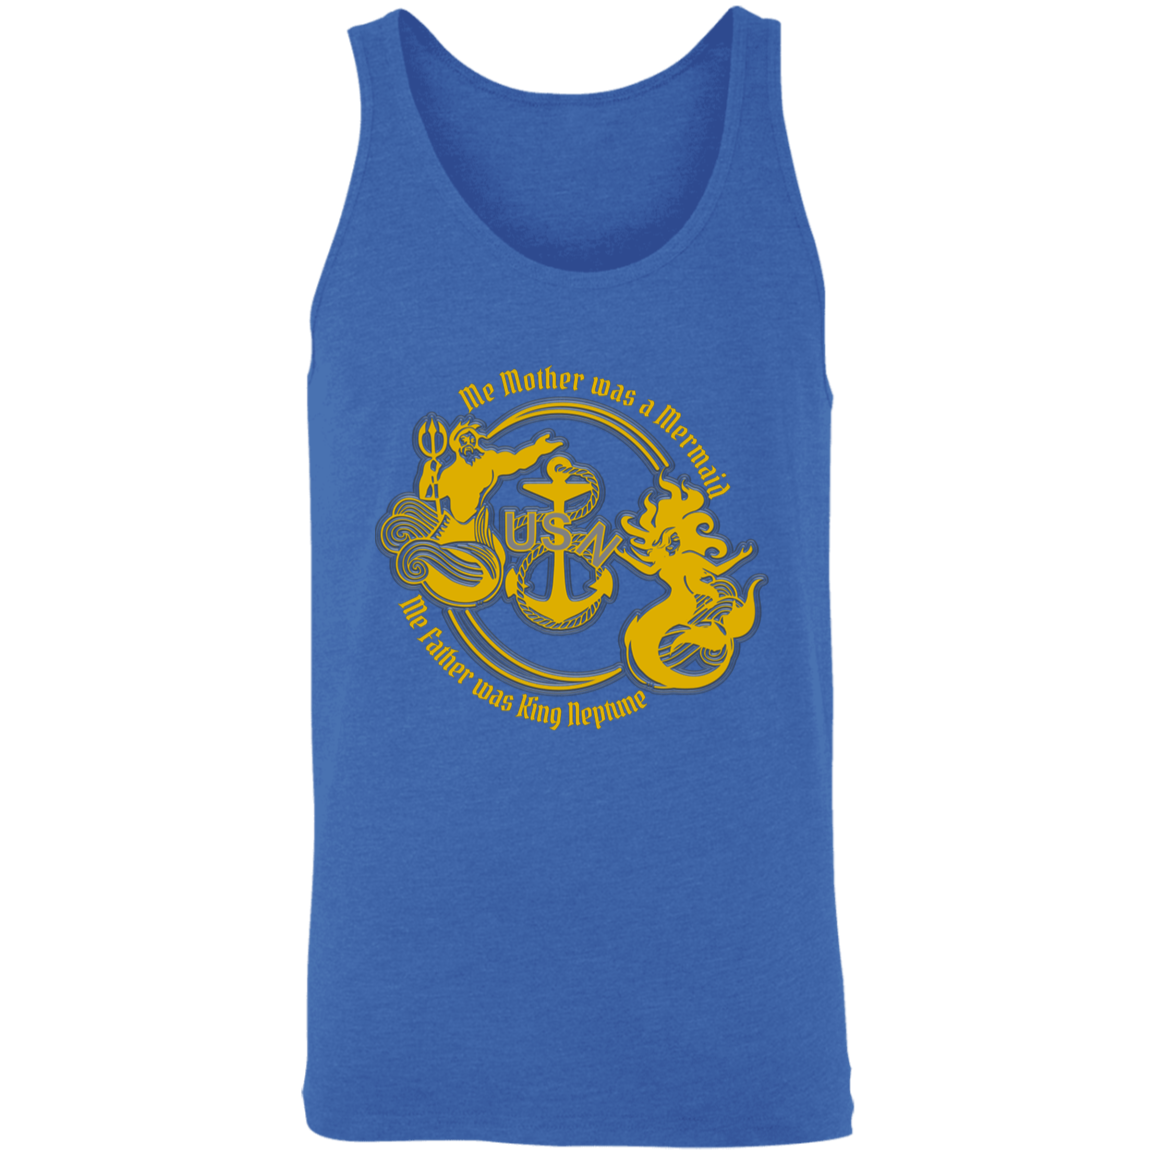 Me Mother and Father Gold Unisex Tank